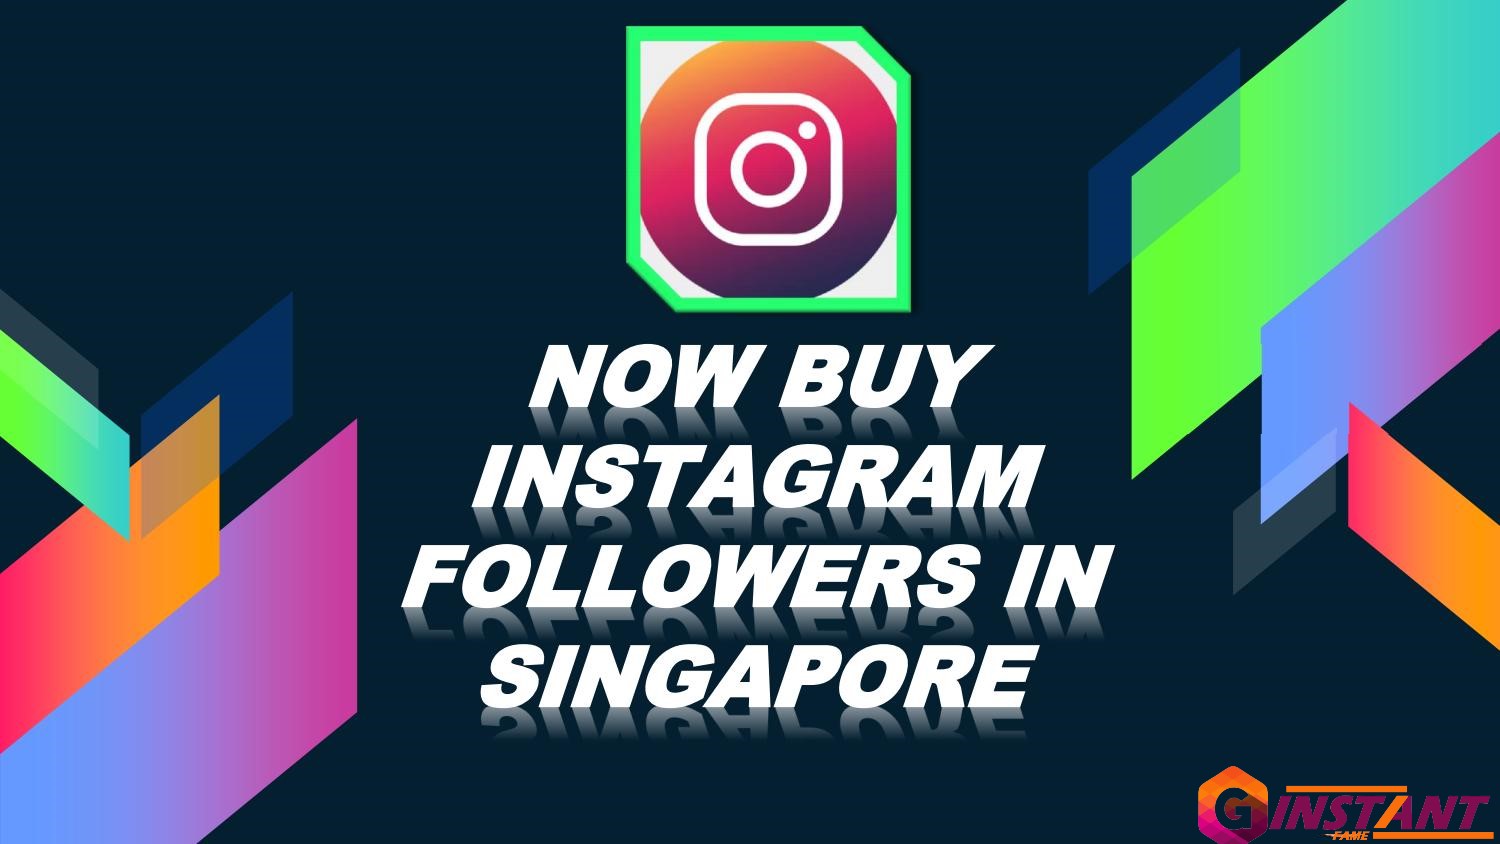 How To Buy Instagram Followers Singapore?